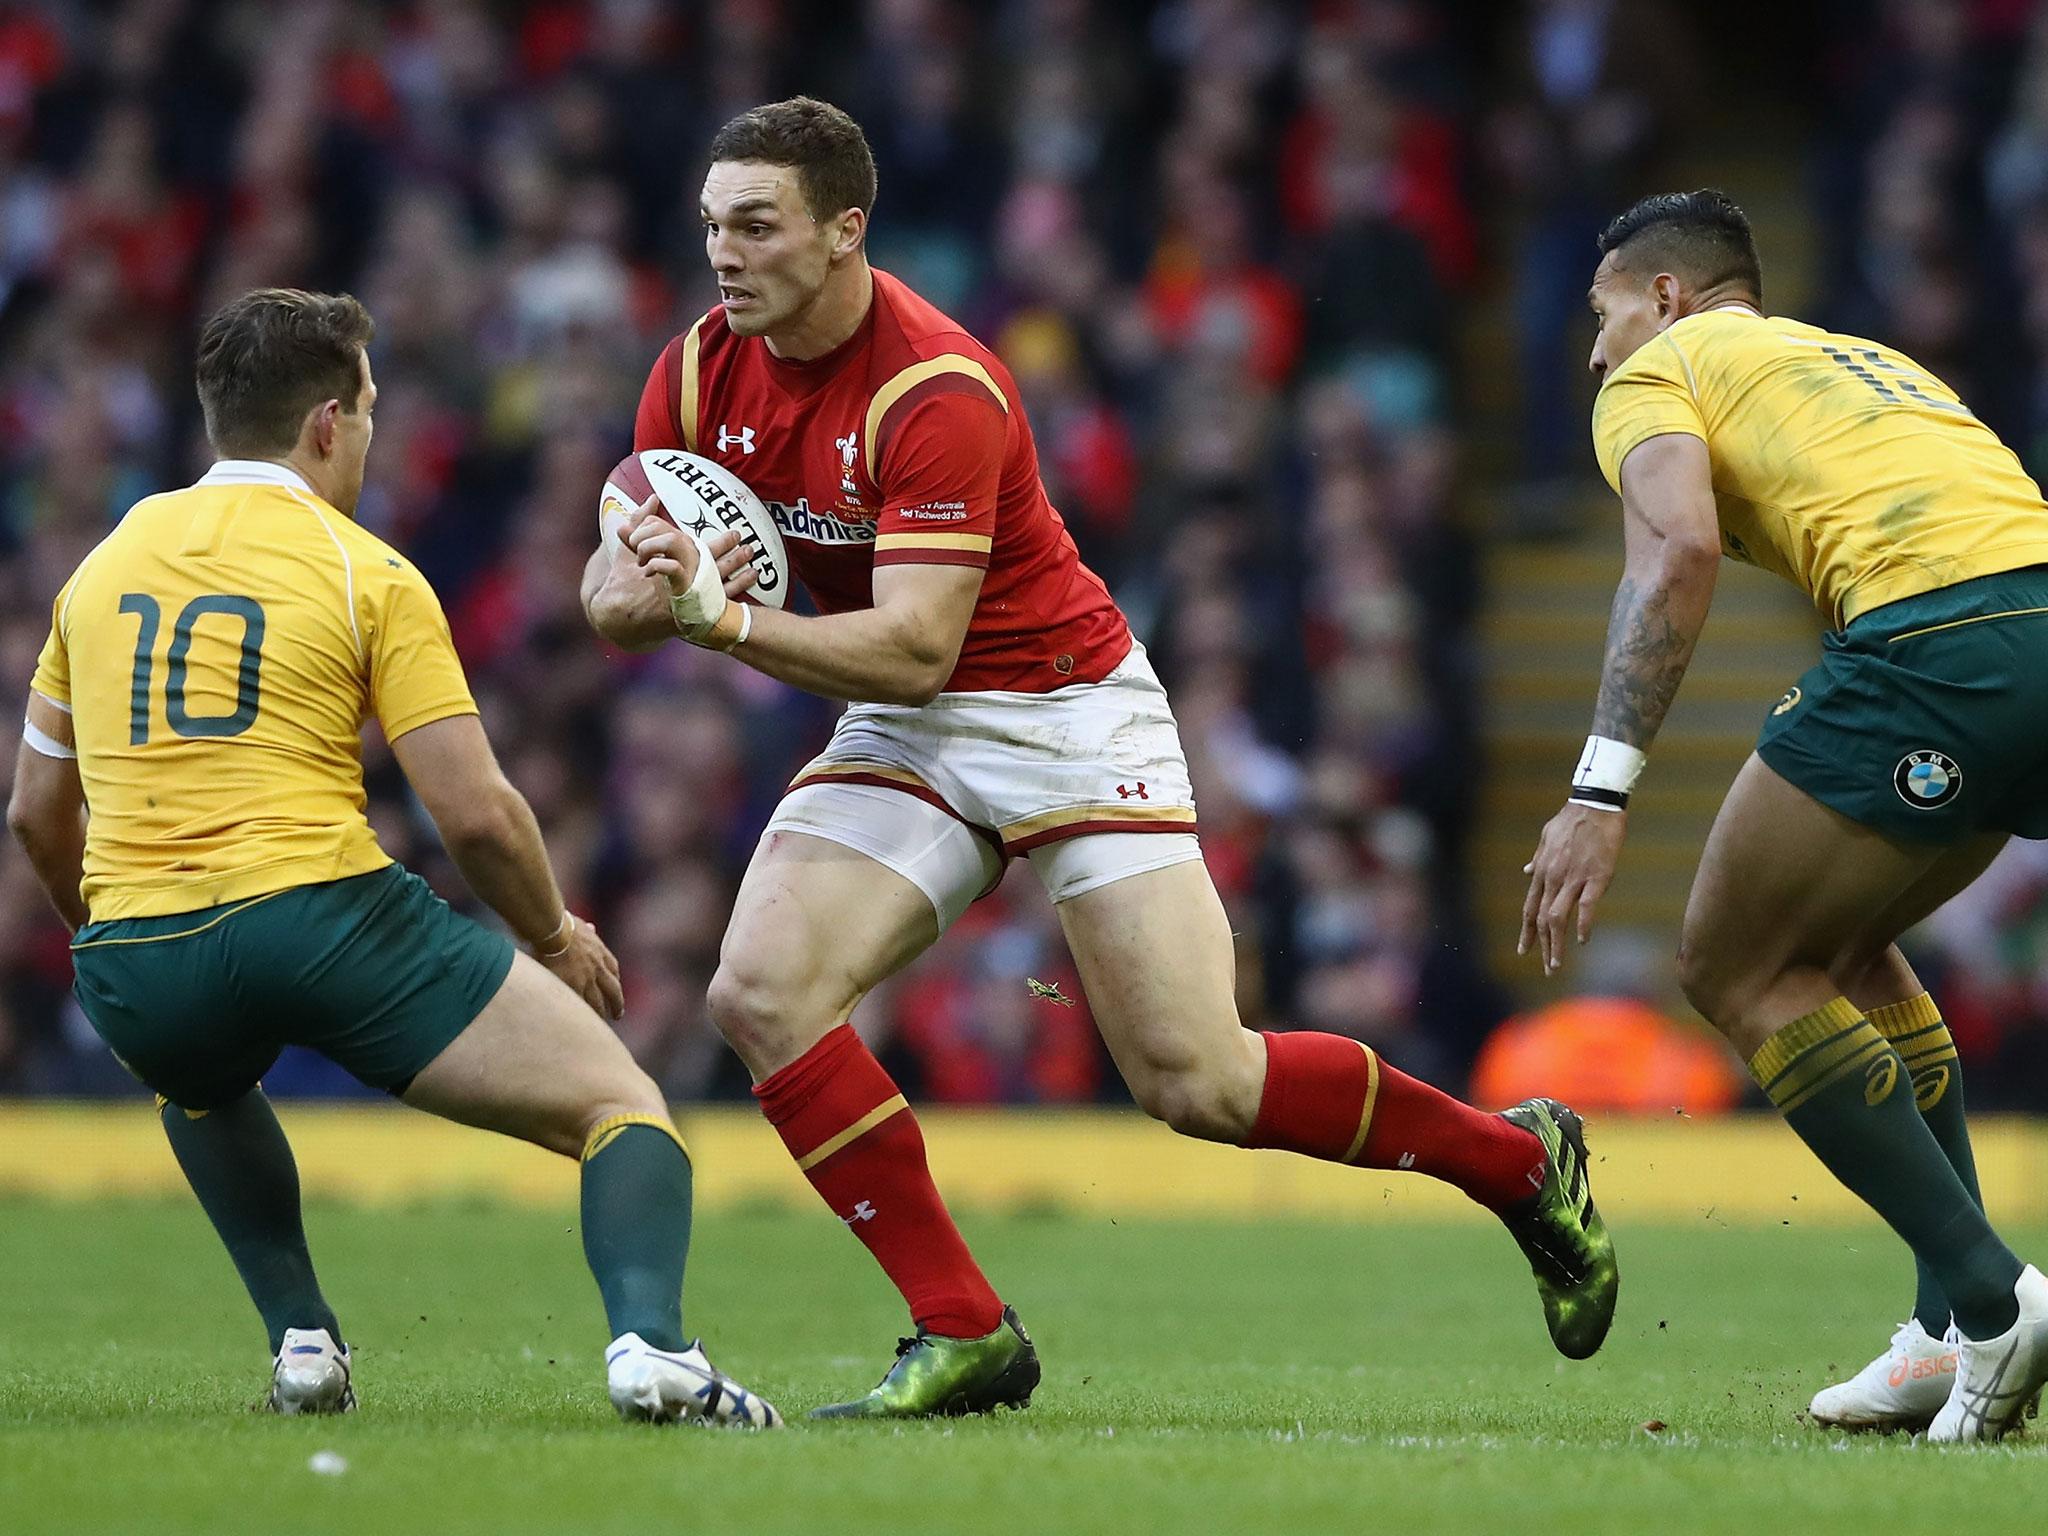 George North will need to be at his best if Wales are to end their six game winless run against Argentina